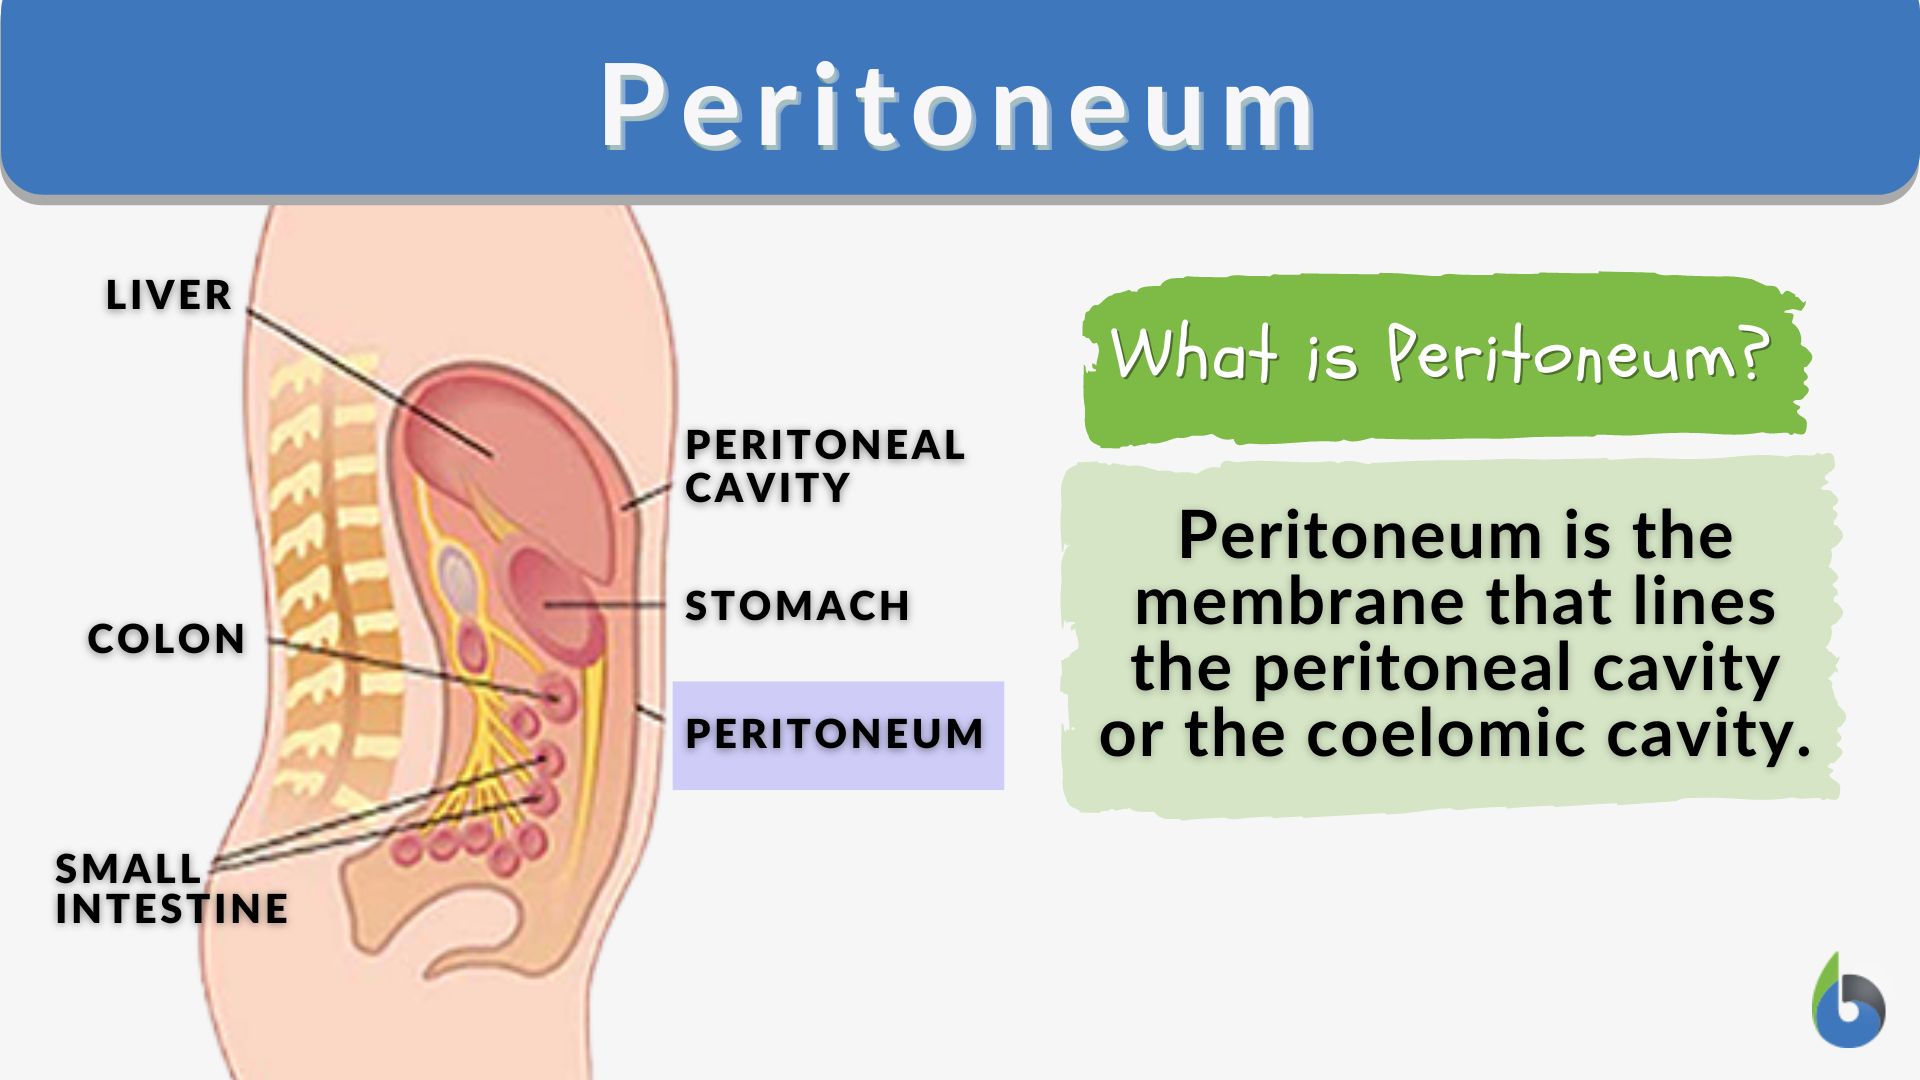 Abdomen and pelvis: structure and function